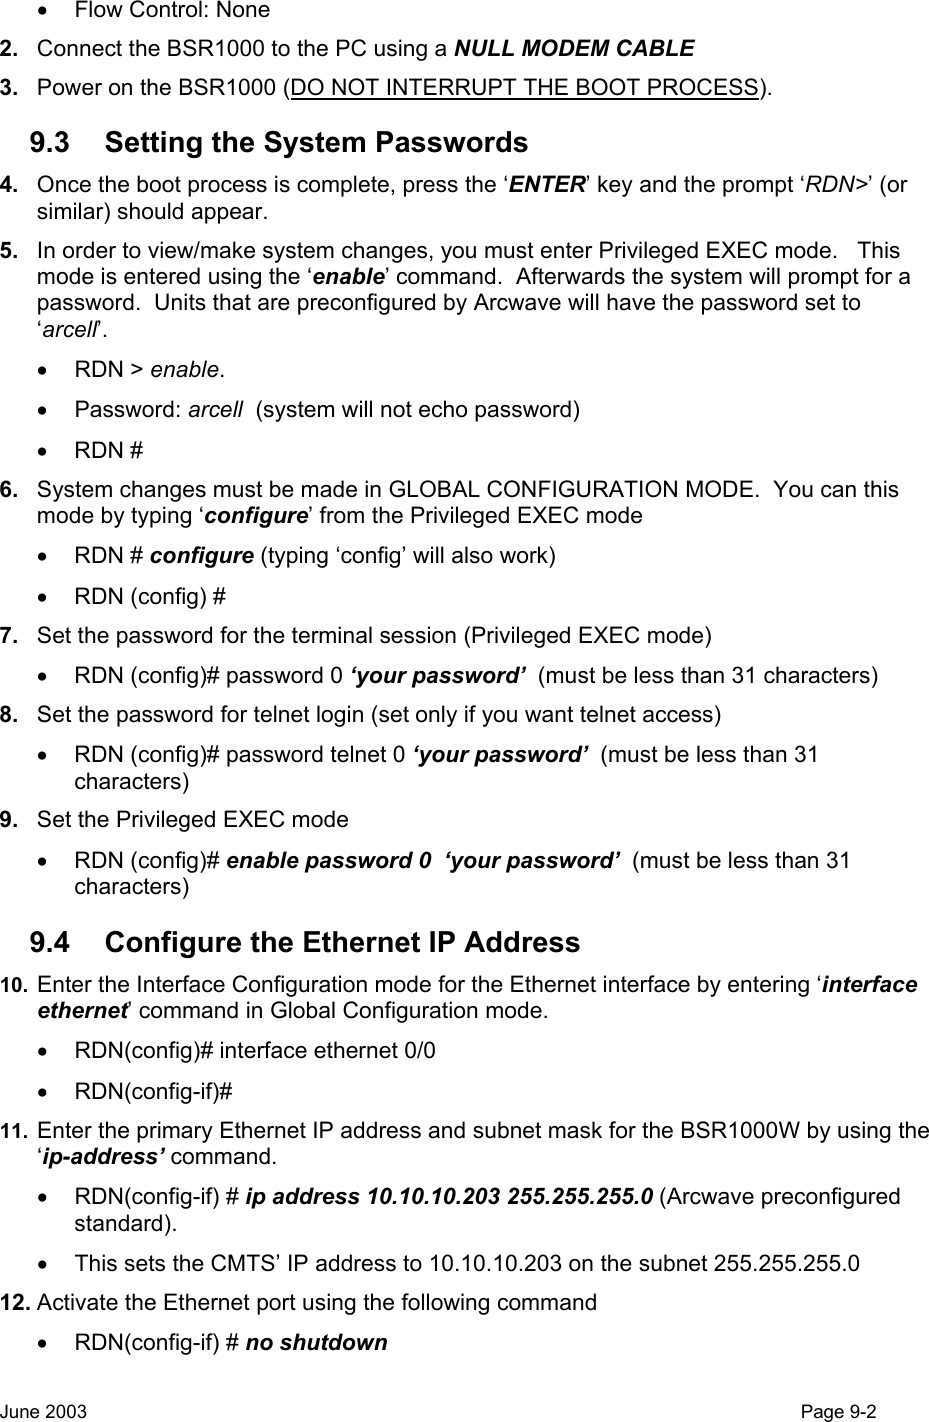  •  Flow Control: None 2.  Connect the BSR1000 to the PC using a NULL MODEM CABLE 3.  Power on the BSR1000 (DO NOT INTERRUPT THE BOOT PROCESS). 9.3  Setting the System Passwords 4.  Once the boot process is complete, press the ‘ENTER’ key and the prompt ‘RDN&gt;’ (or similar) should appear. 5.  In order to view/make system changes, you must enter Privileged EXEC mode.   This mode is entered using the ‘enable’ command.  Afterwards the system will prompt for a password.  Units that are preconfigured by Arcwave will have the password set to ‘arcell’. • RDN &gt; enable. • Password: arcell  (system will not echo password) • RDN # 6.  System changes must be made in GLOBAL CONFIGURATION MODE.  You can this mode by typing ‘configure’ from the Privileged EXEC mode • RDN # configure (typing ‘config’ will also work) •  RDN (config) #  7.  Set the password for the terminal session (Privileged EXEC mode) •  RDN (config)# password 0 ‘your password’  (must be less than 31 characters) 8.  Set the password for telnet login (set only if you want telnet access) •  RDN (config)# password telnet 0 ‘your password’  (must be less than 31 characters) 9.  Set the Privileged EXEC mode  • RDN (config)# enable password 0  ‘your password’  (must be less than 31 characters) 9.4  Configure the Ethernet IP Address 10.  Enter the Interface Configuration mode for the Ethernet interface by entering ‘interface ethernet’ command in Global Configuration mode. •  RDN(config)# interface ethernet 0/0 • RDN(config-if)#  11.  Enter the primary Ethernet IP address and subnet mask for the BSR1000W by using the ‘ip-address’ command. • RDN(config-if) # ip address 10.10.10.203 255.255.255.0 (Arcwave preconfigured standard). •  This sets the CMTS’ IP address to 10.10.10.203 on the subnet 255.255.255.0 12. Activate the Ethernet port using the following command • RDN(config-if) # no shutdown  June 2003                                                                                                                                         Page 9-2  